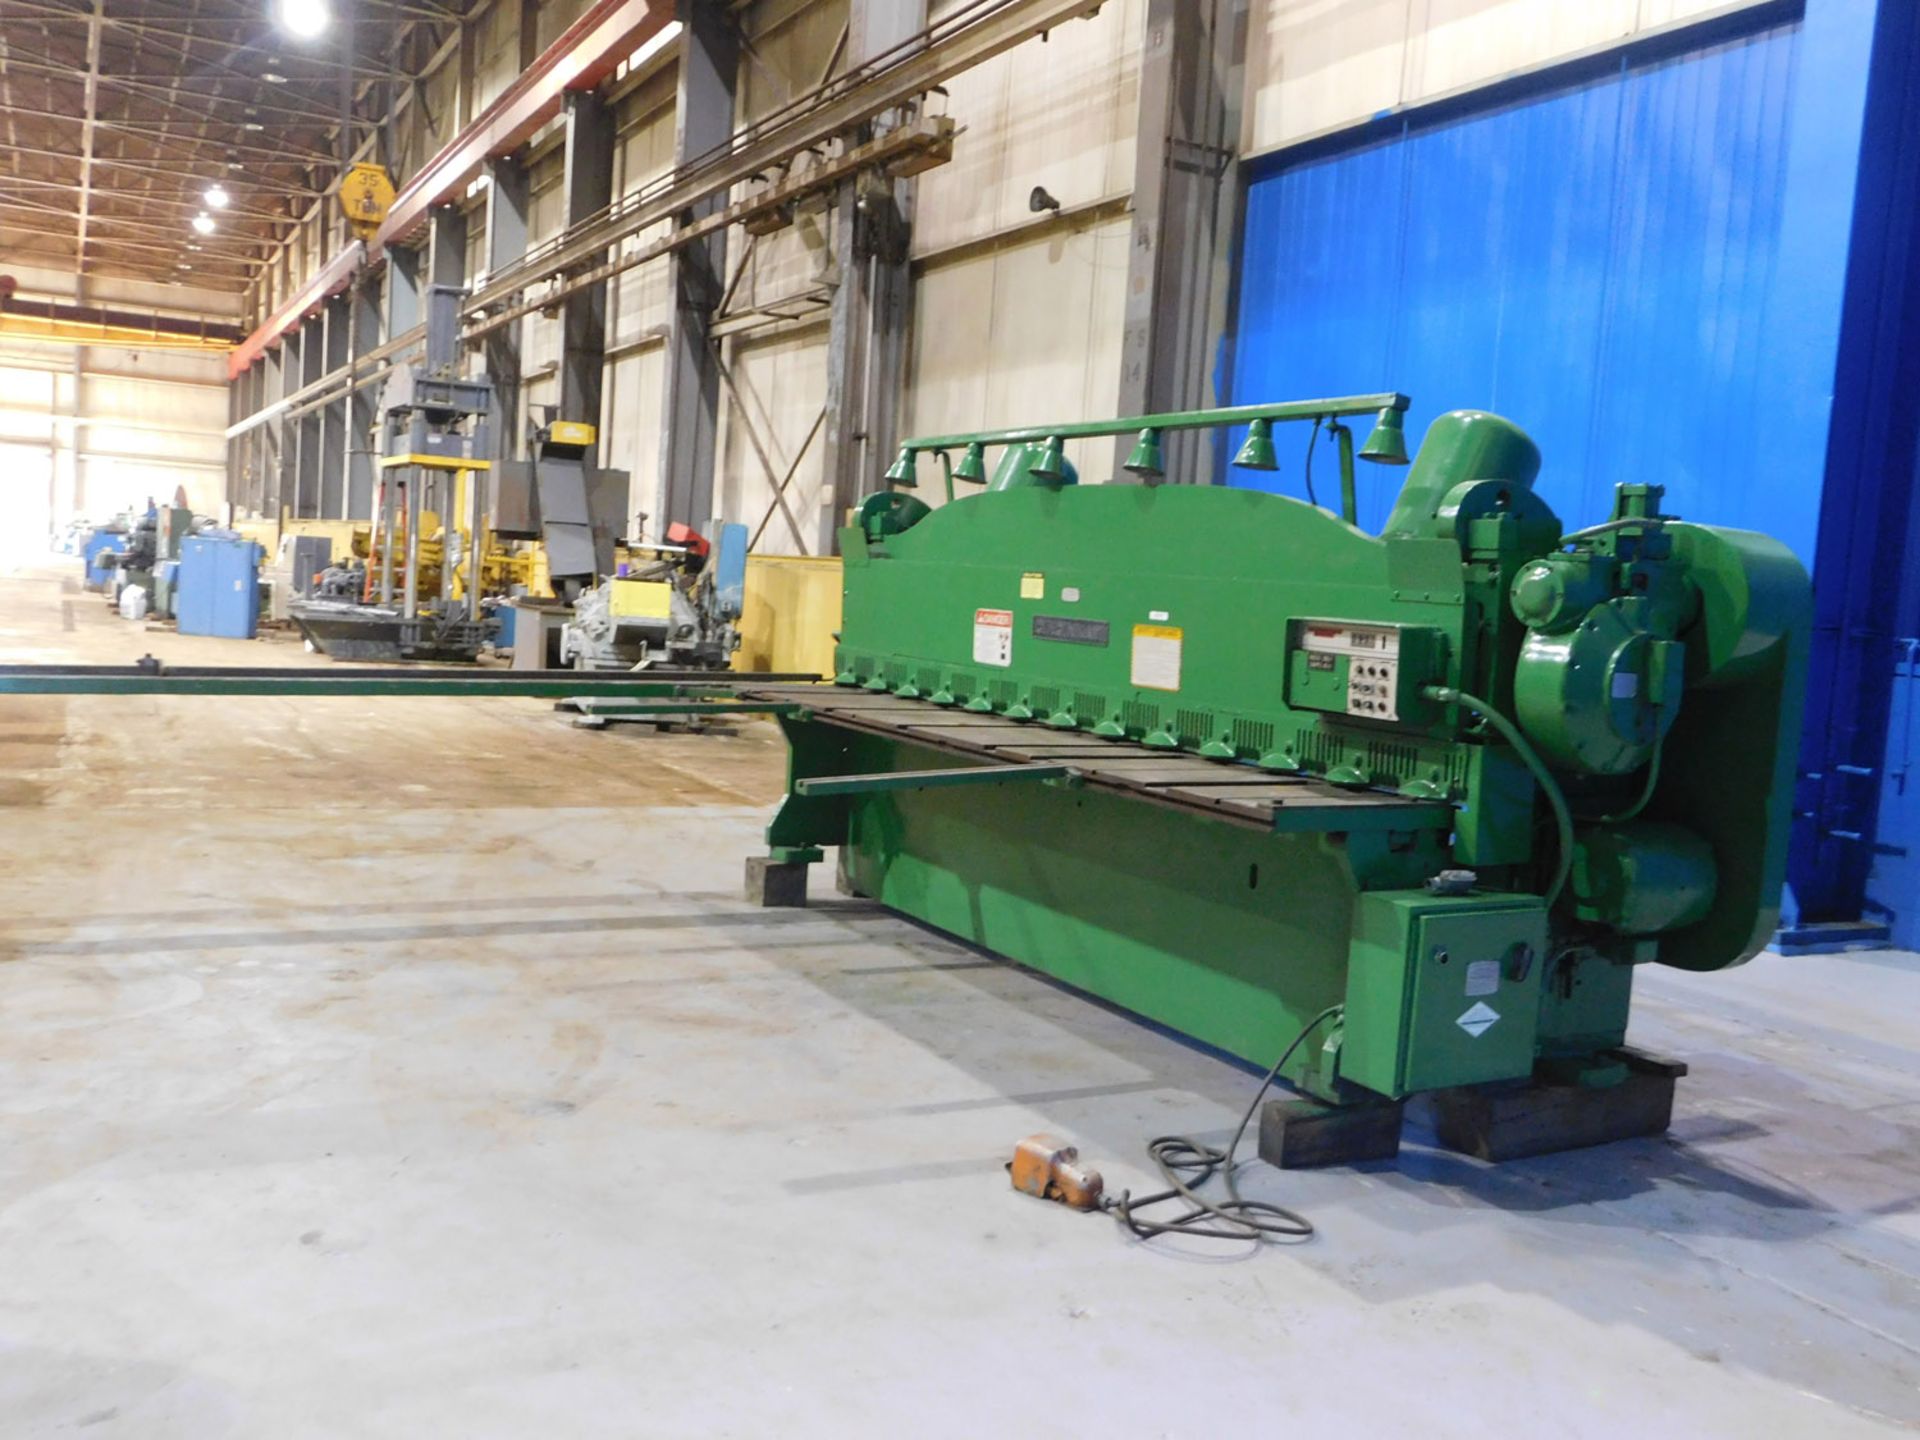 Cincinnati Power Shear, 1/4" x 12', Mdl: 2CC12, S/N: 44341 (5991P) (Located In Painesville, OH) - Image 3 of 8